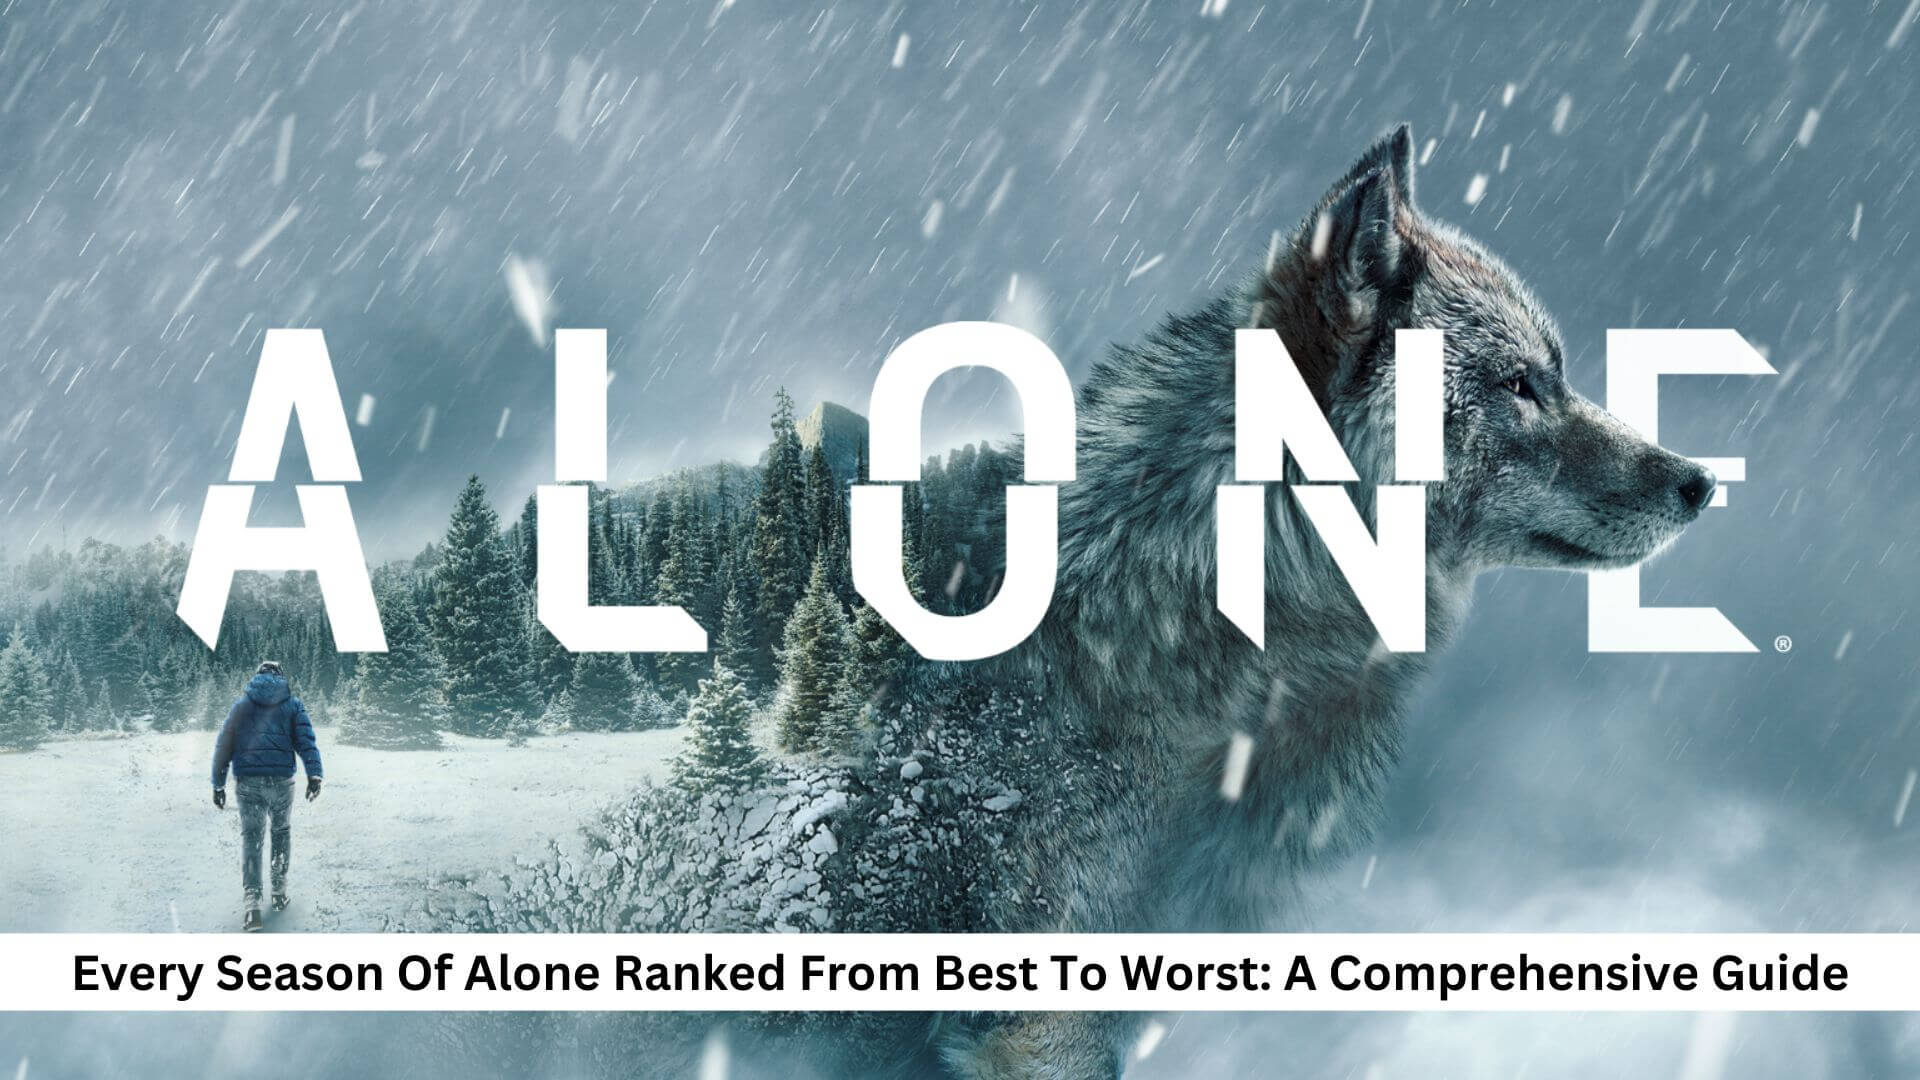 Every Season Of Alone Ranked From Best To Worst A Comprehensive Guide